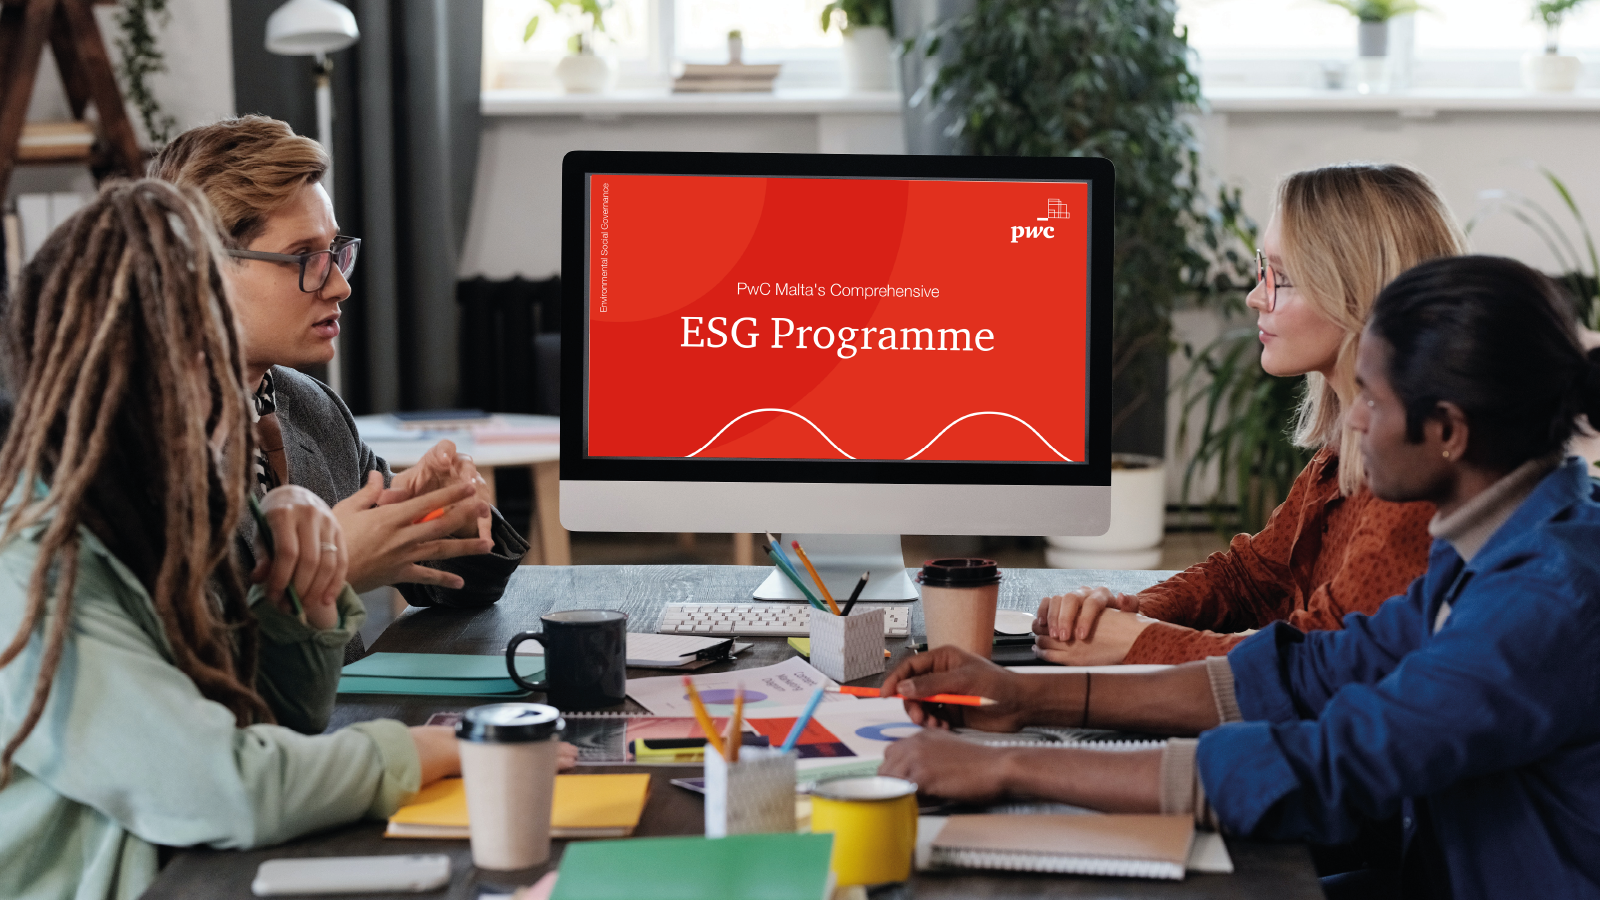 PwC’s Academy launches a comprehensive CPE qualified programme on ESG